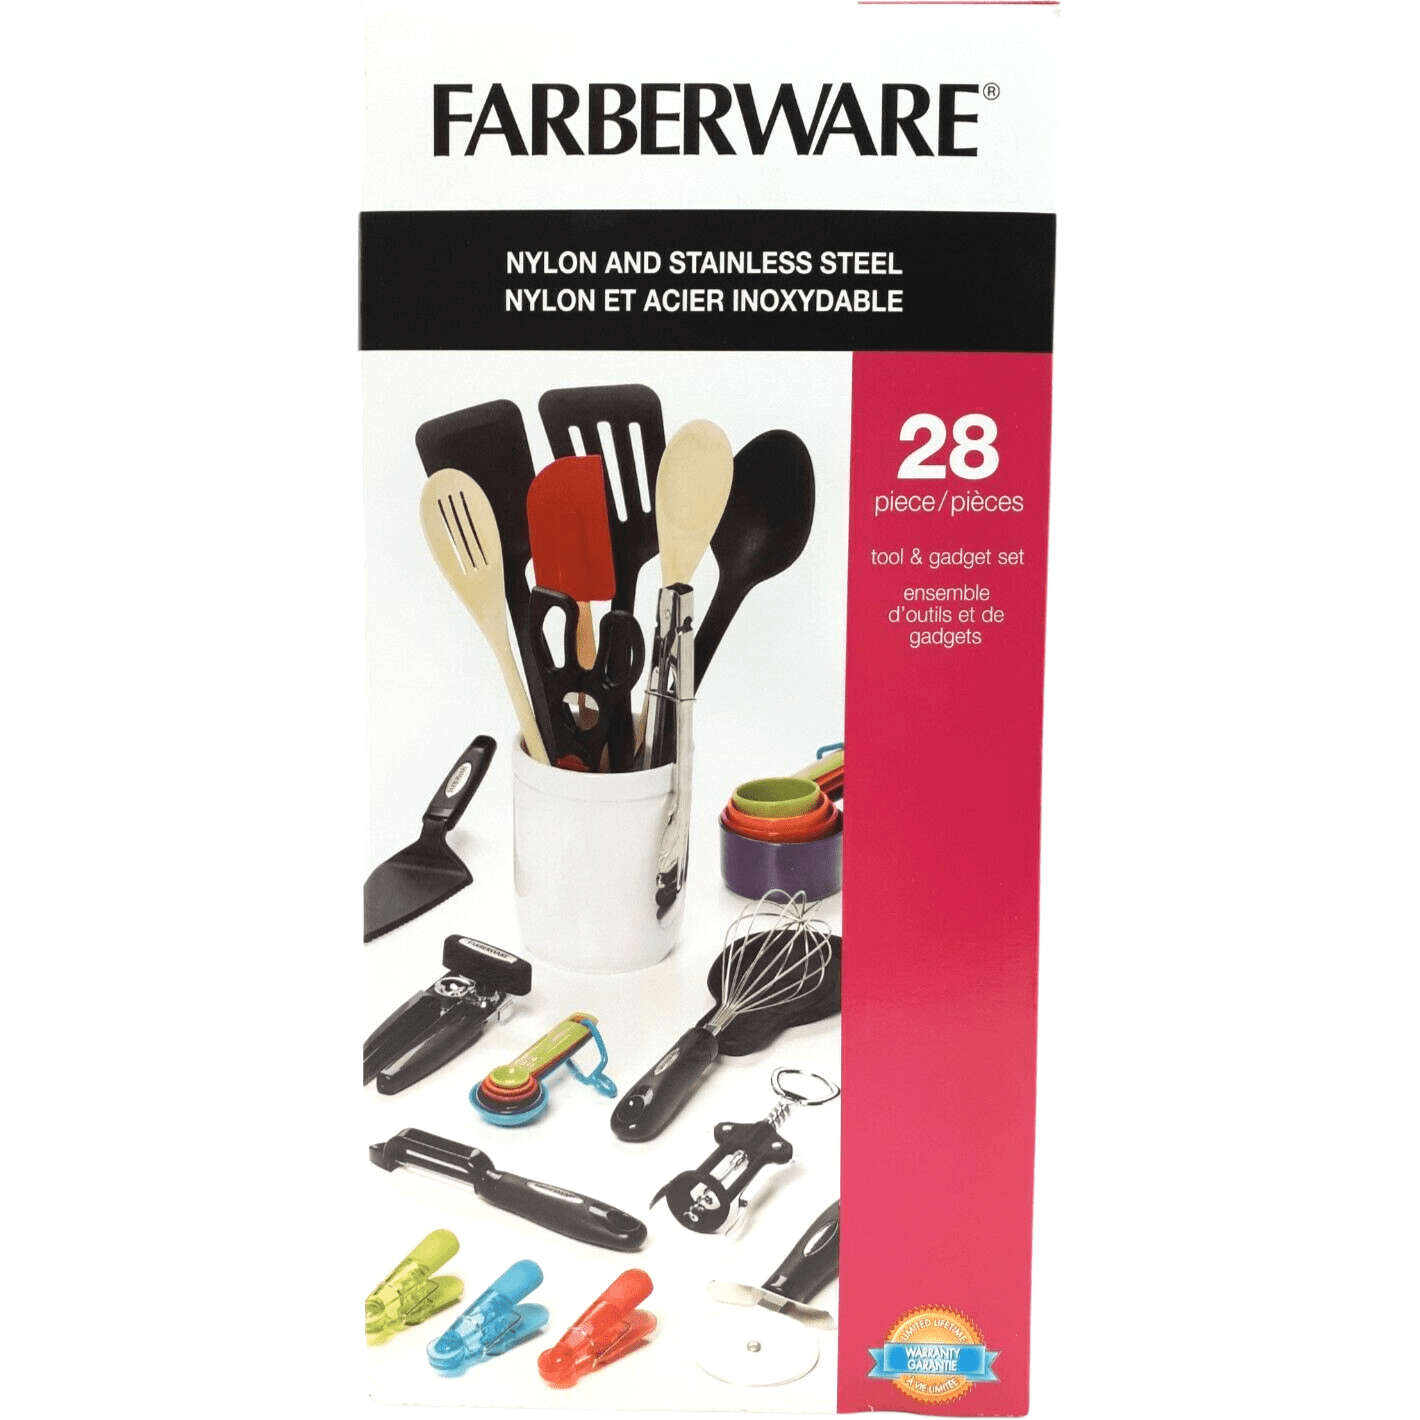 https://www.canadawideliquidations.com/wp-content/uploads/2022/05/products-Farberware05.png